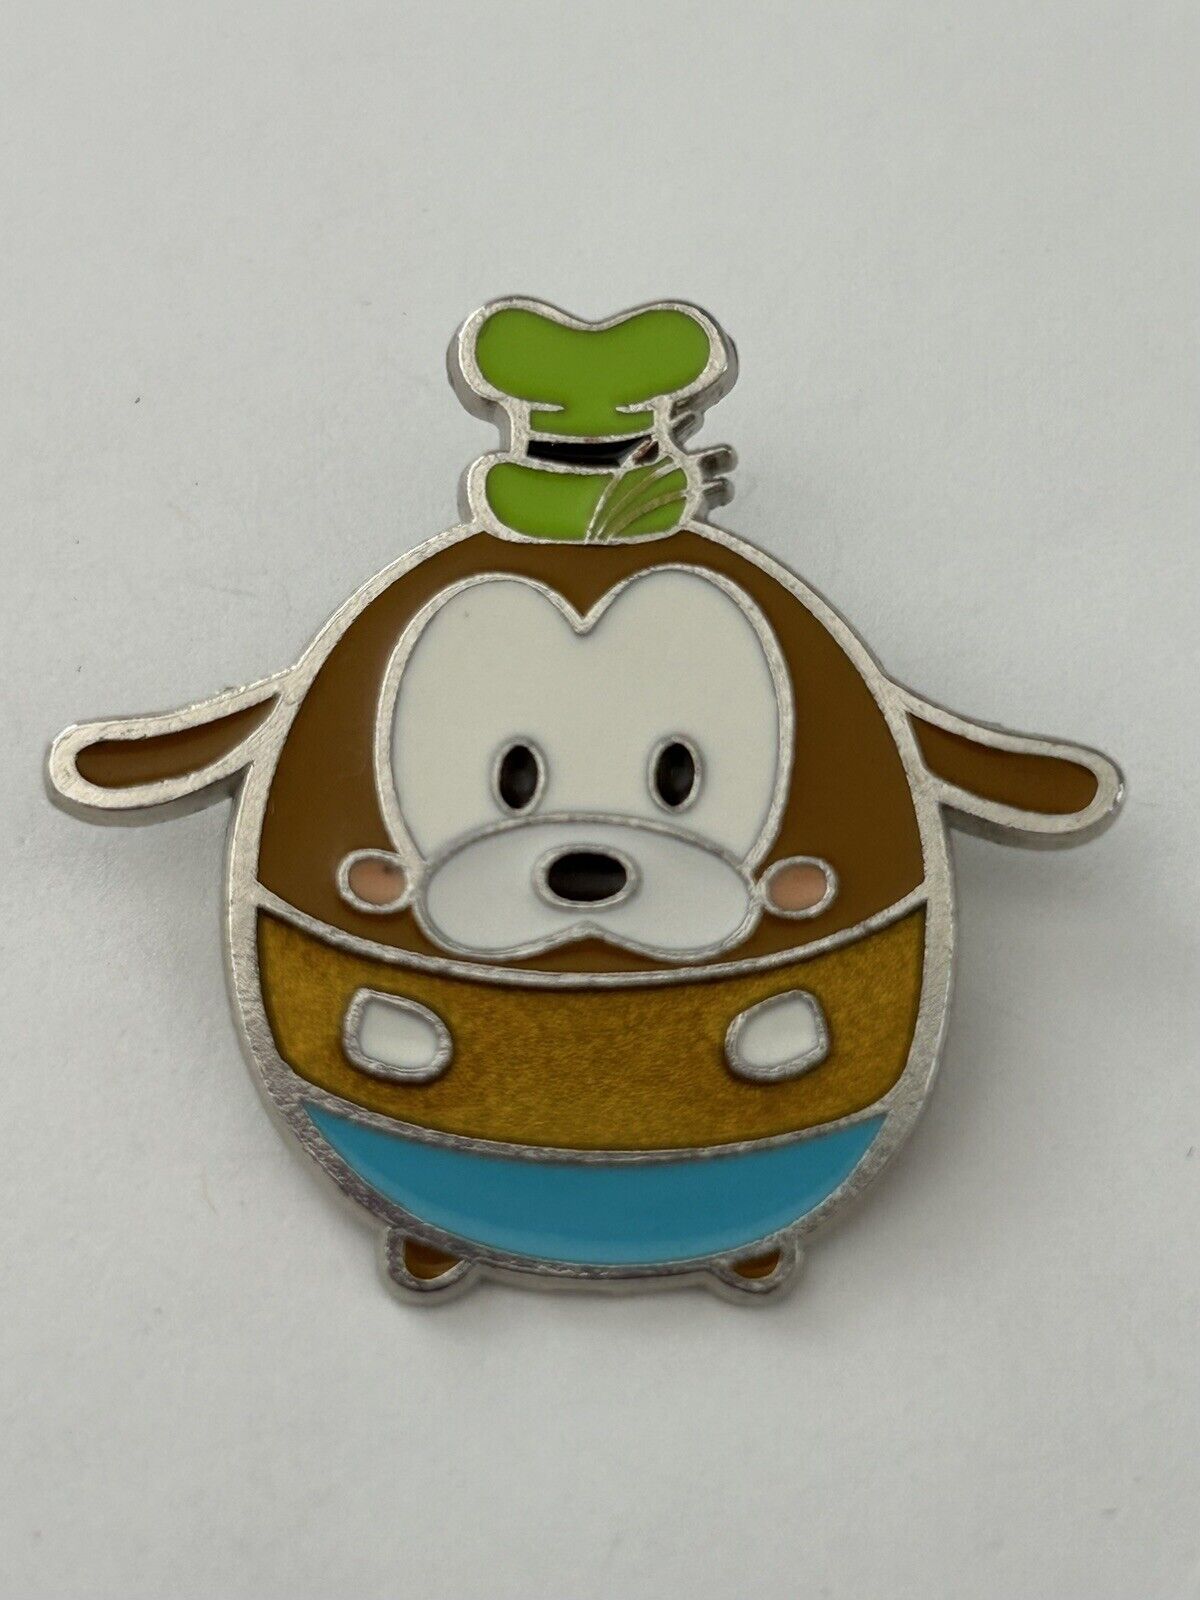 DISNEY PIN - HKDL - Ufufy 6 Pin Booster Pack - Goofy only